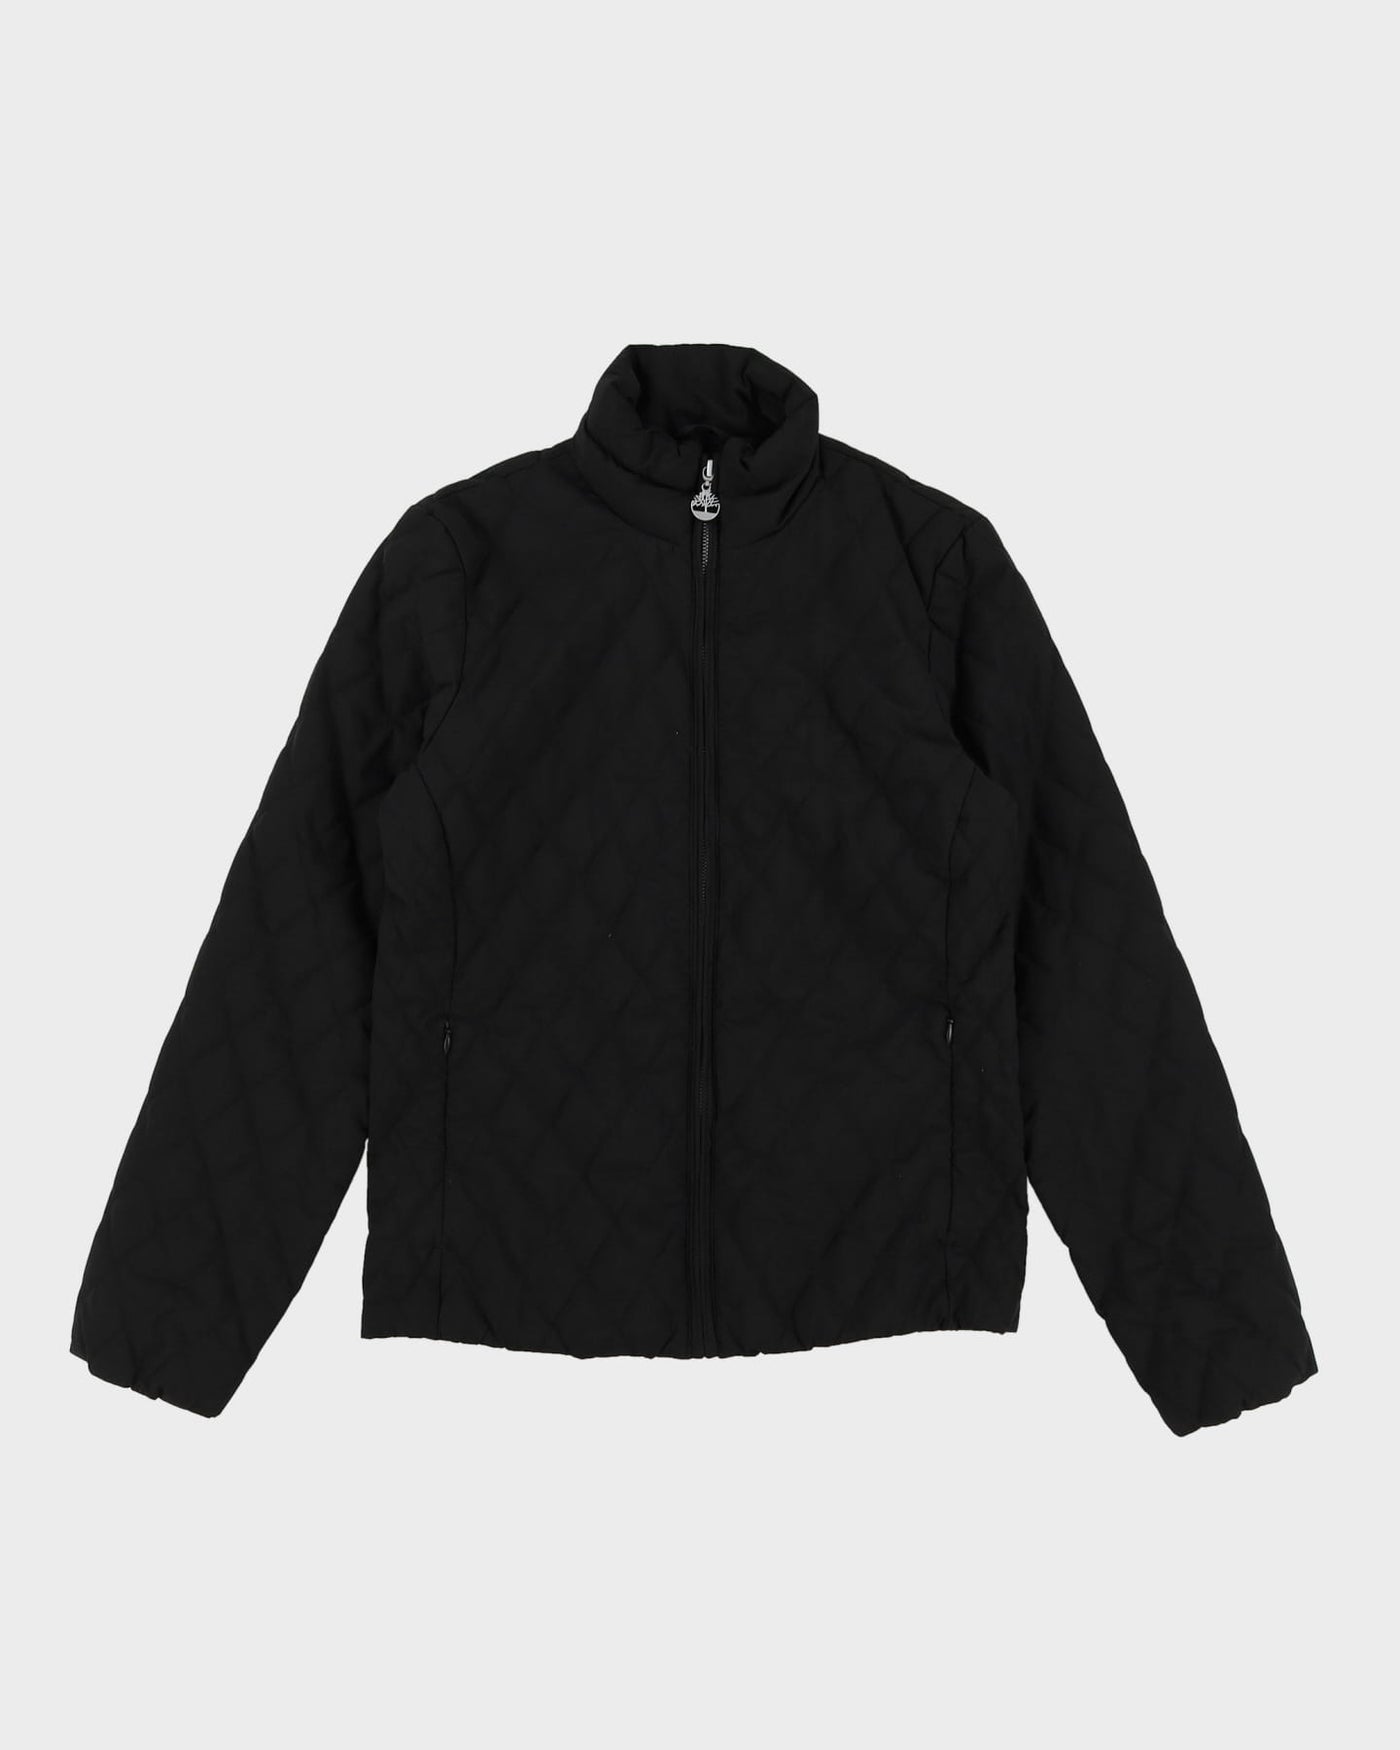 Timberland Black Quilted Jacket - S